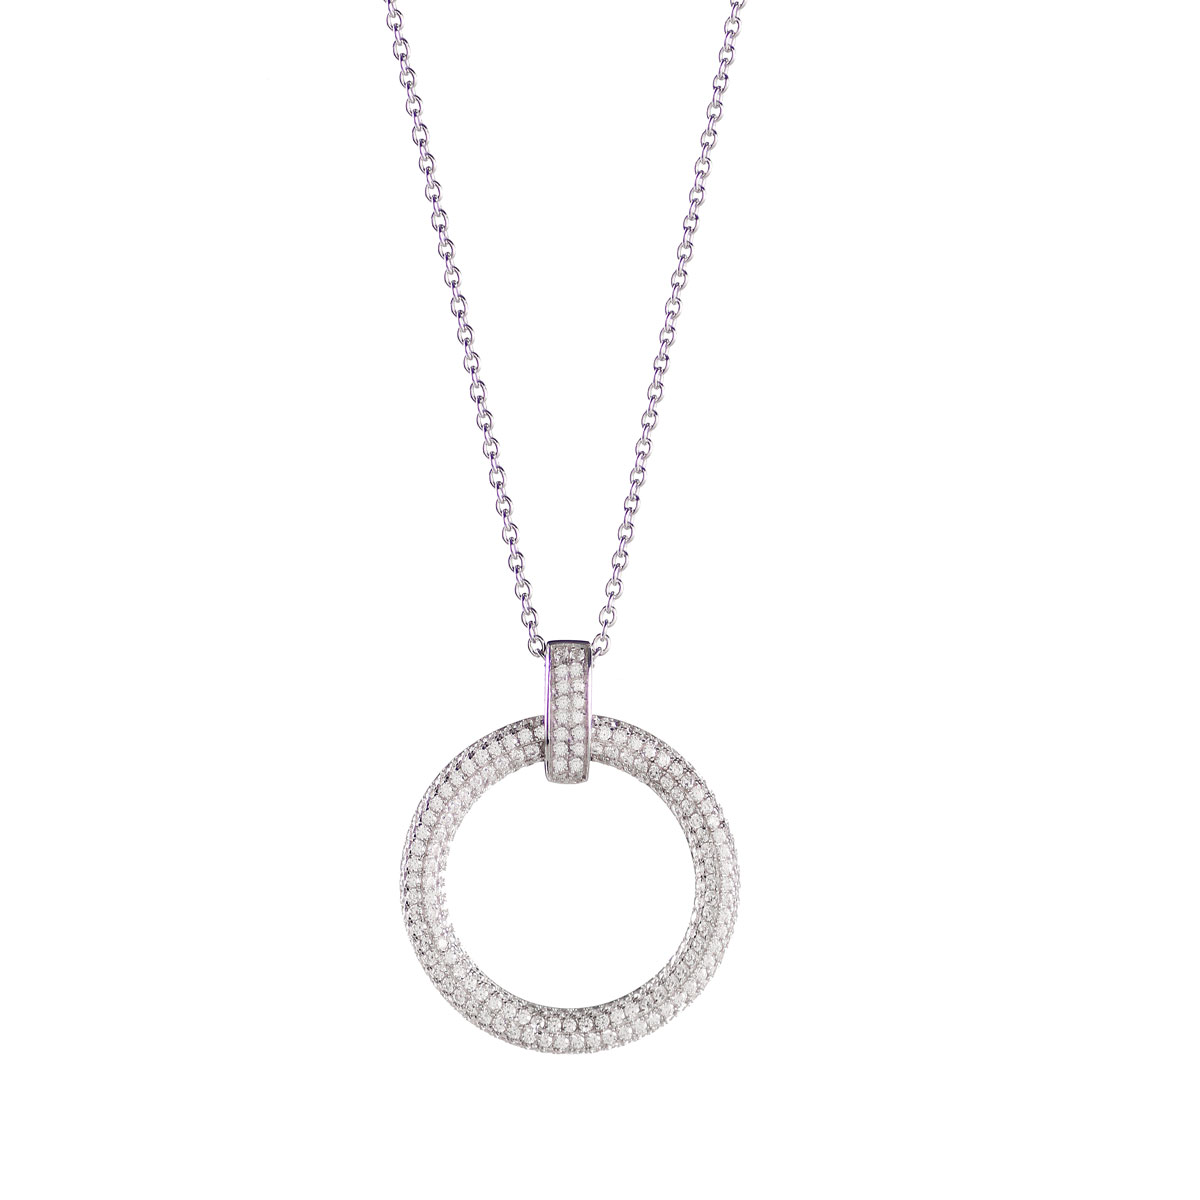 Cashs Ireland, Clarice Sterling Silver Pave Pendant Necklace